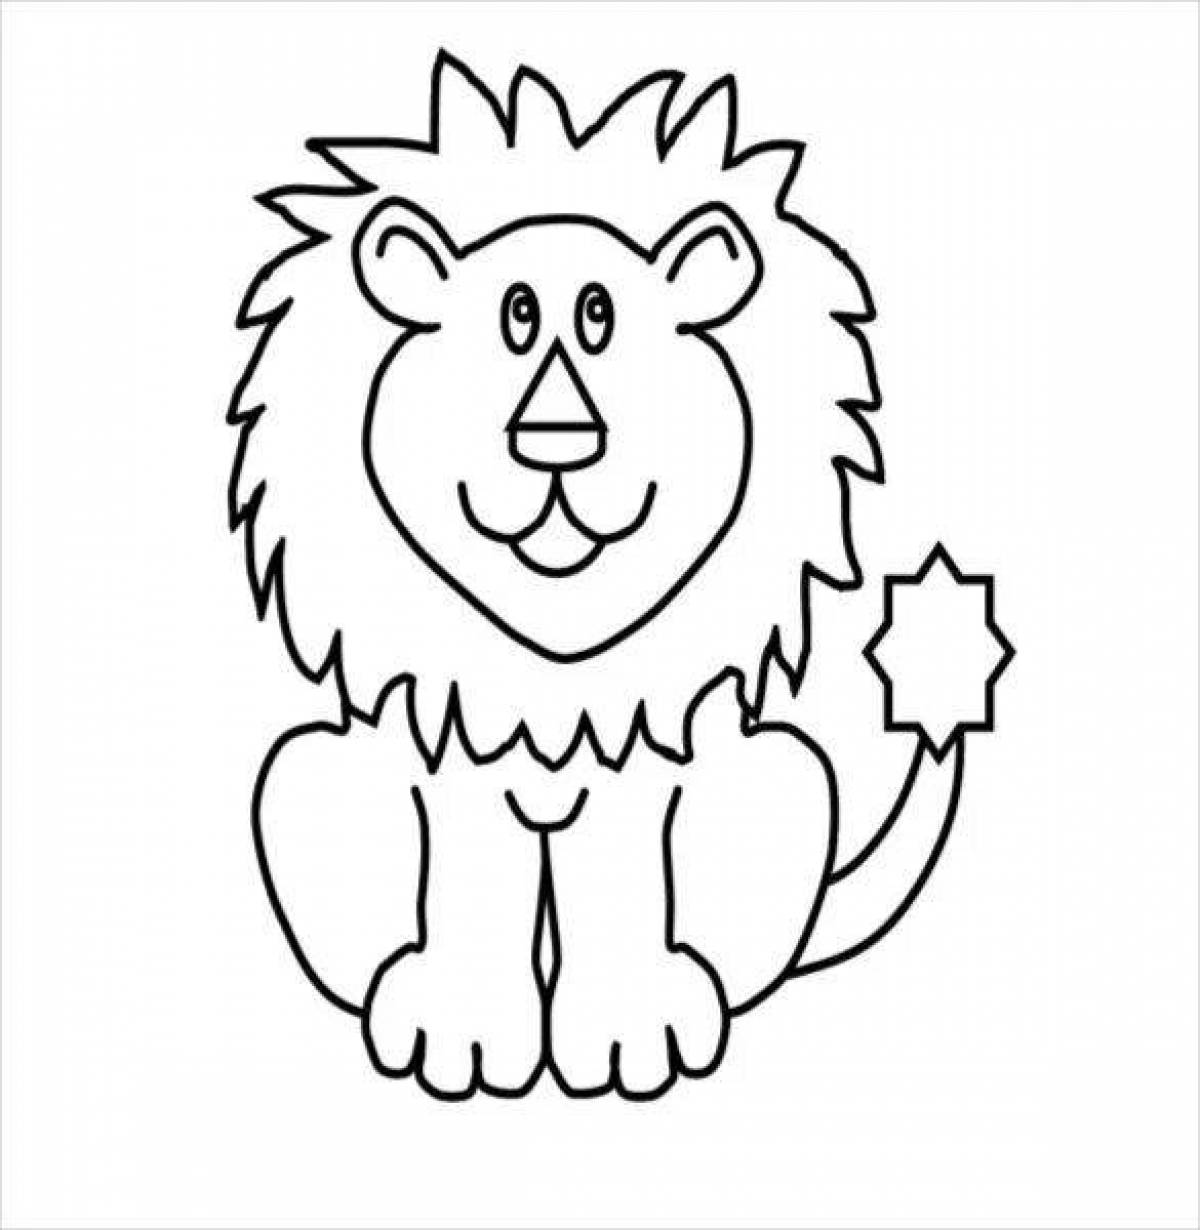 Coloring page of an attractive lion cub